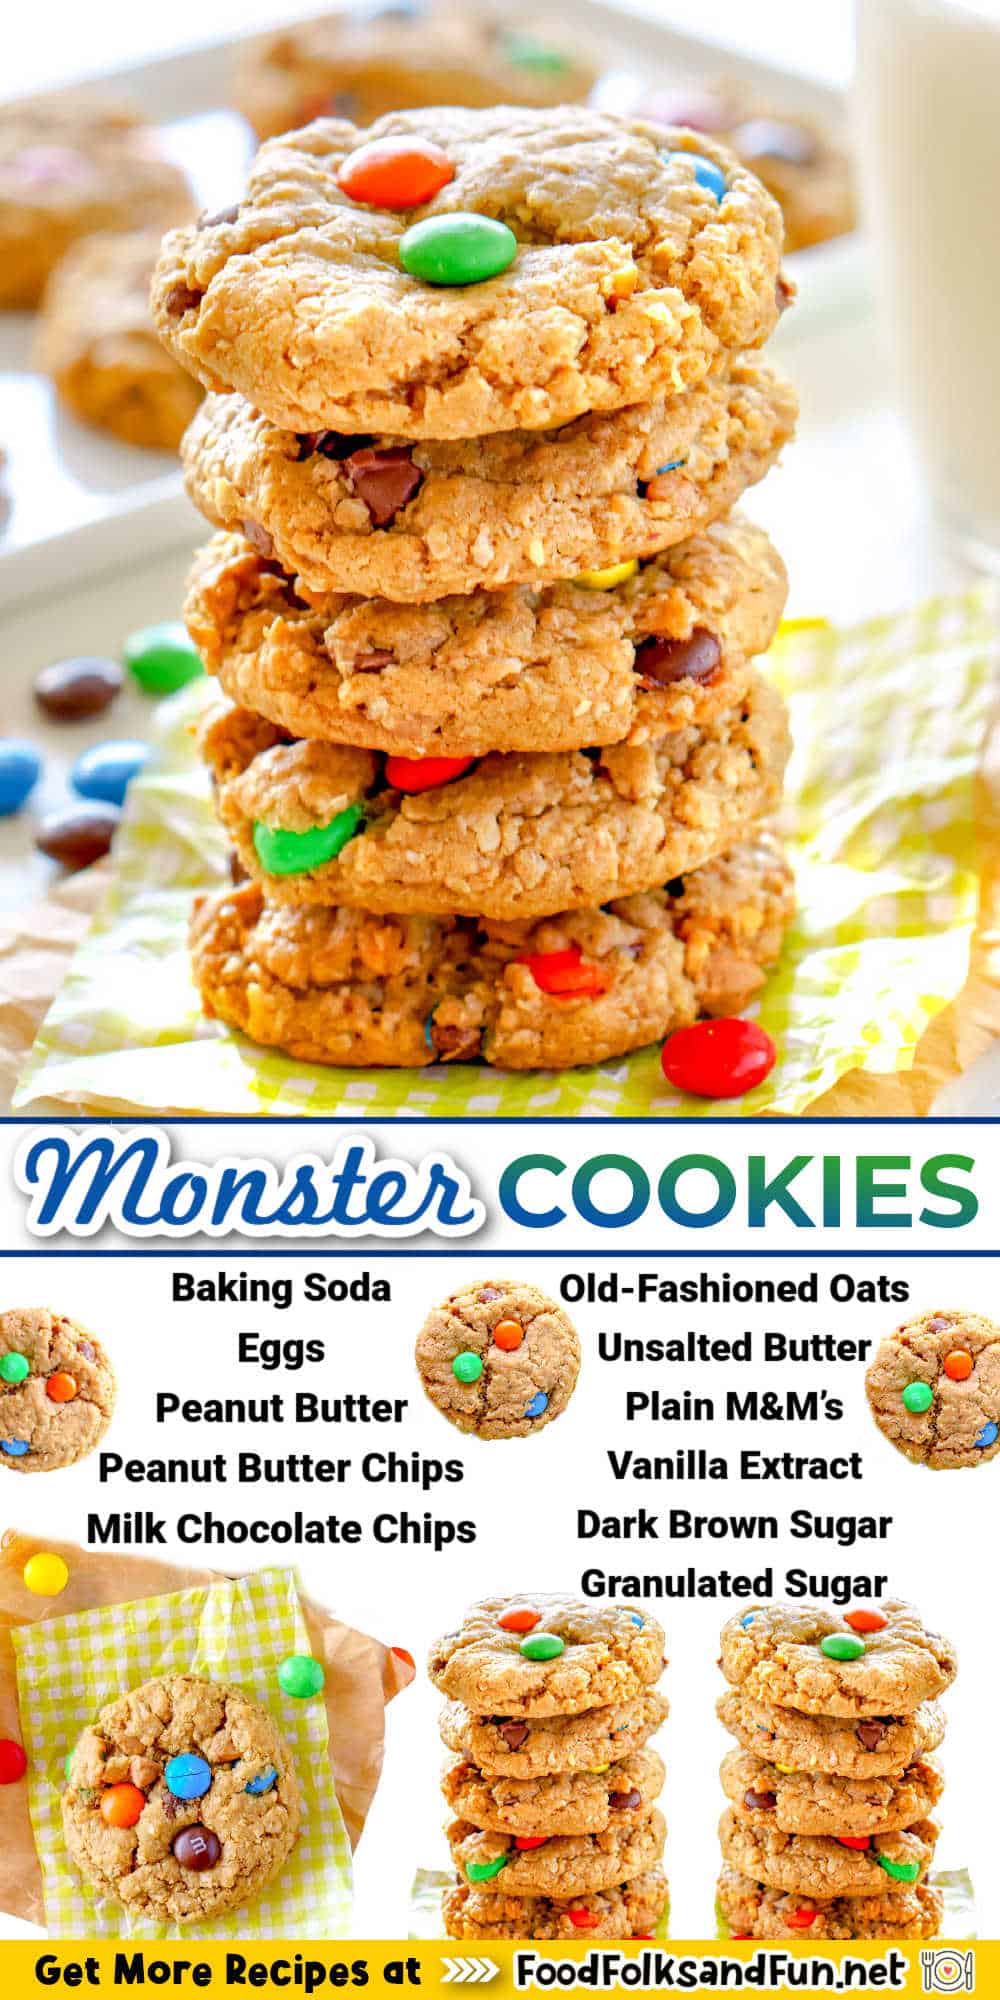 These Gluten-Free Monster Cookies are loaded with peanut butter, oats, and M&Ms. They have crispy edges and are soft and chewy. via @foodfolksandfun